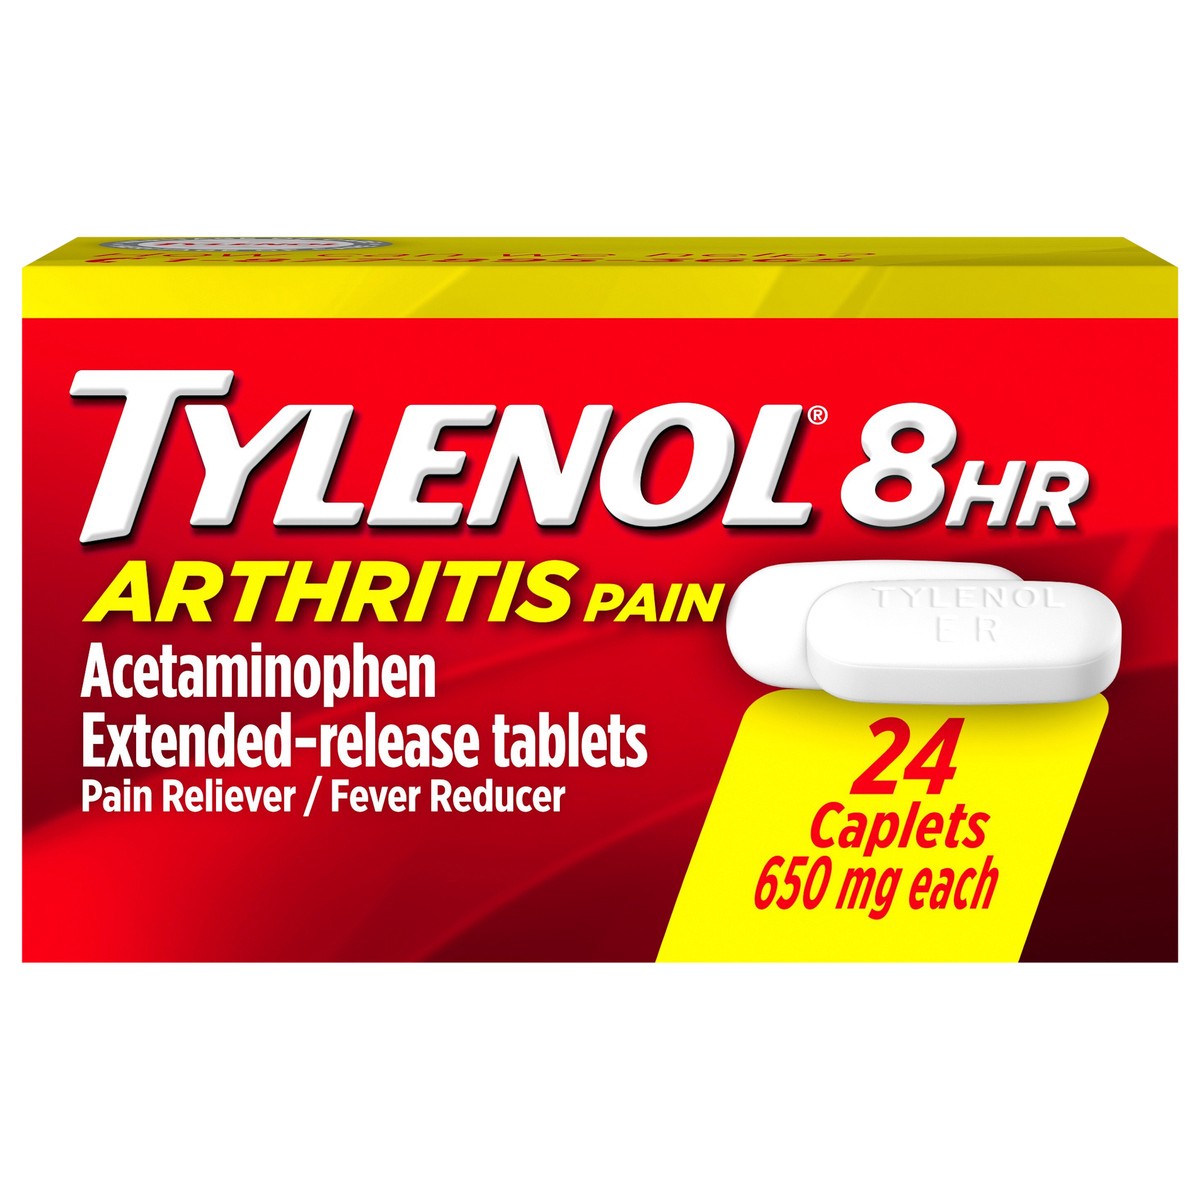 slide 1 of 4, Tylenol 8 Hour Arthritis Pain Relief Extended-Release Tablets, 650 mg Acetaminophen, Joint Pain Reliever & Fever Reducer Medicine, Oral Pain Reliever for Arthritis & Joint Pain, 24 Count, 24 ct